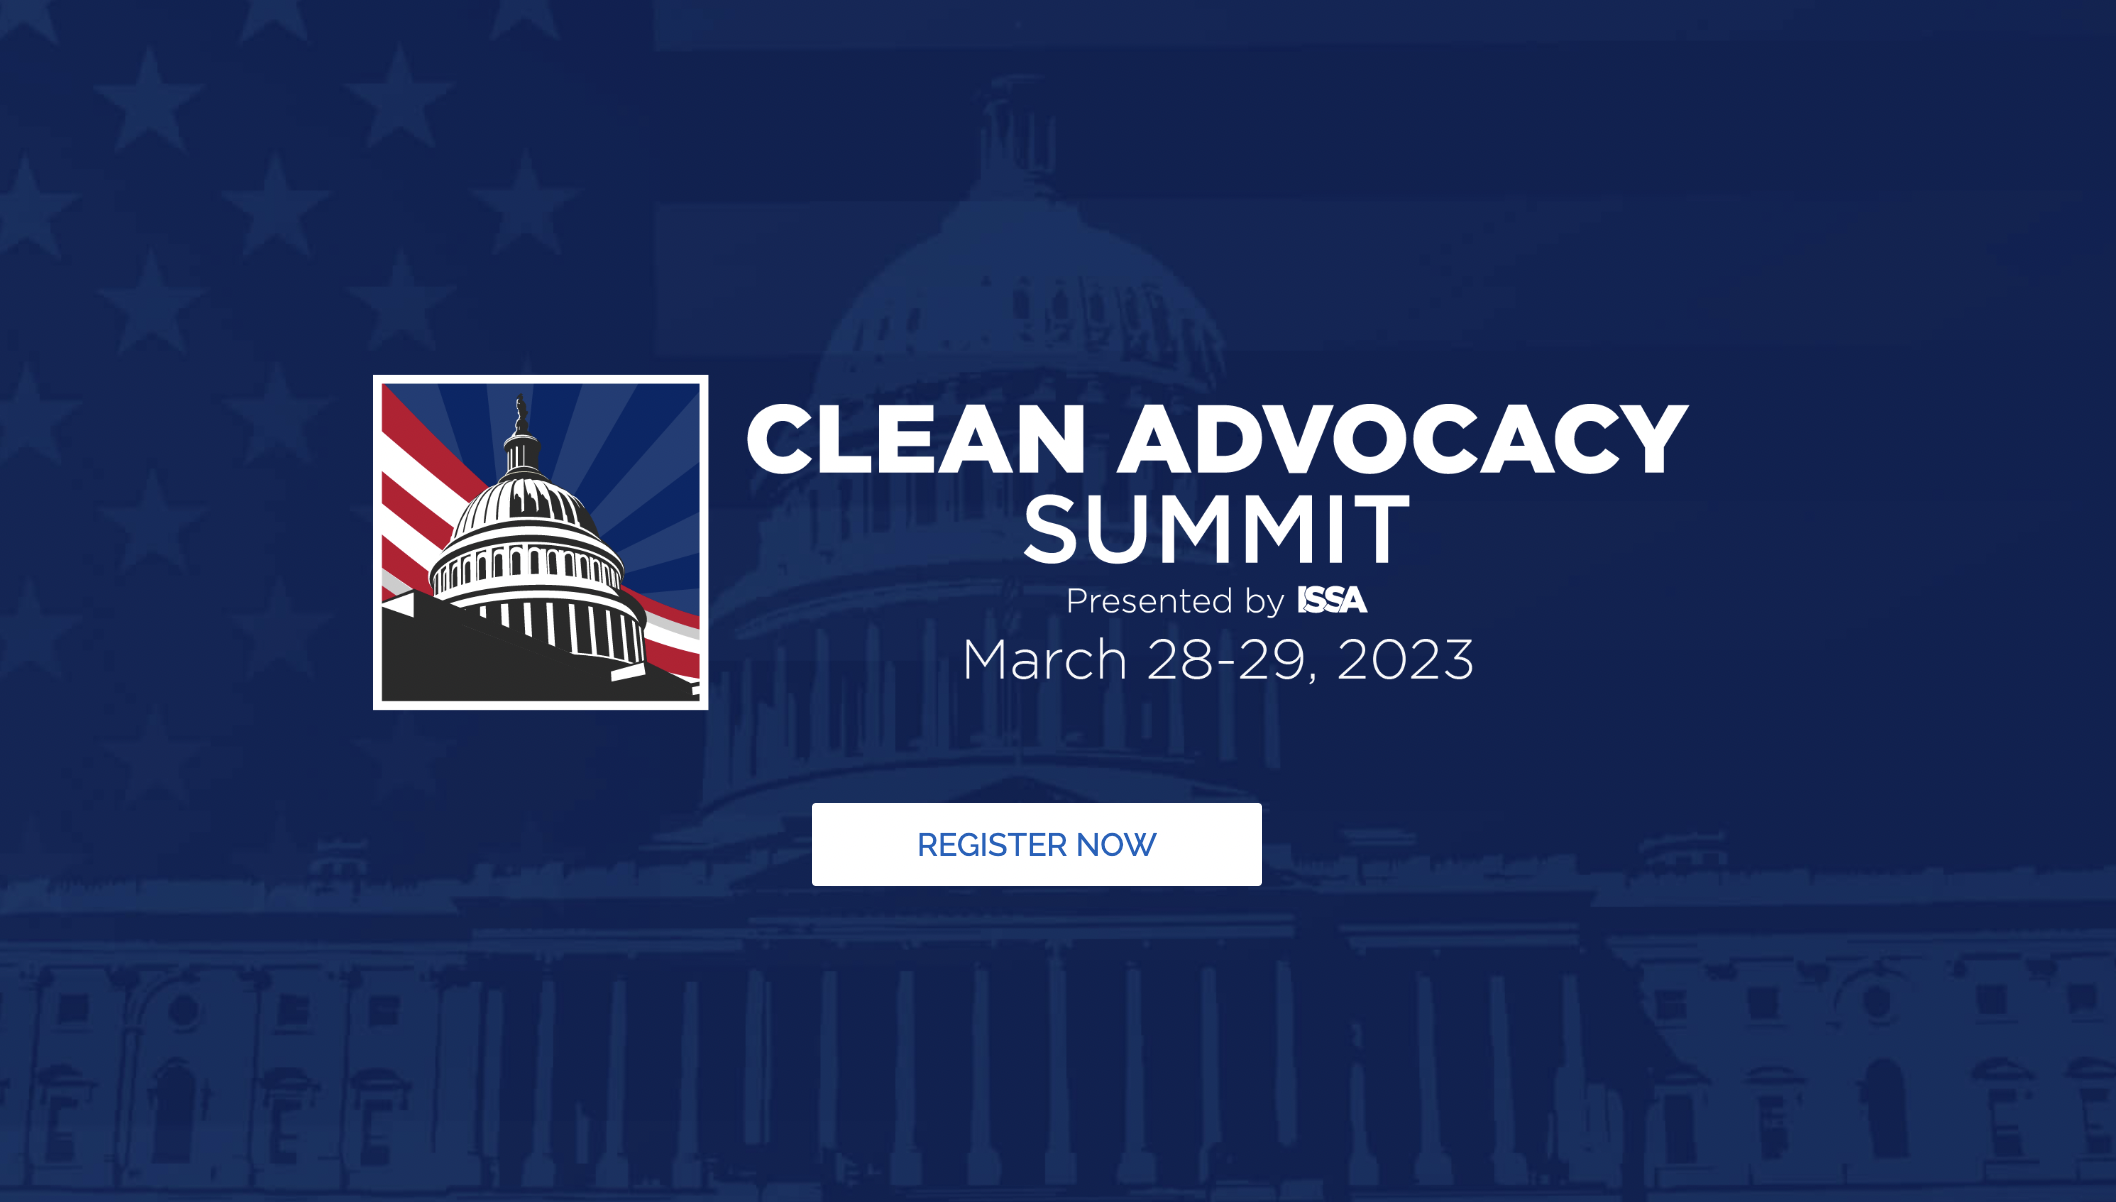 ISSA Announces 2023 Clean Advocacy Summit Cleanfax